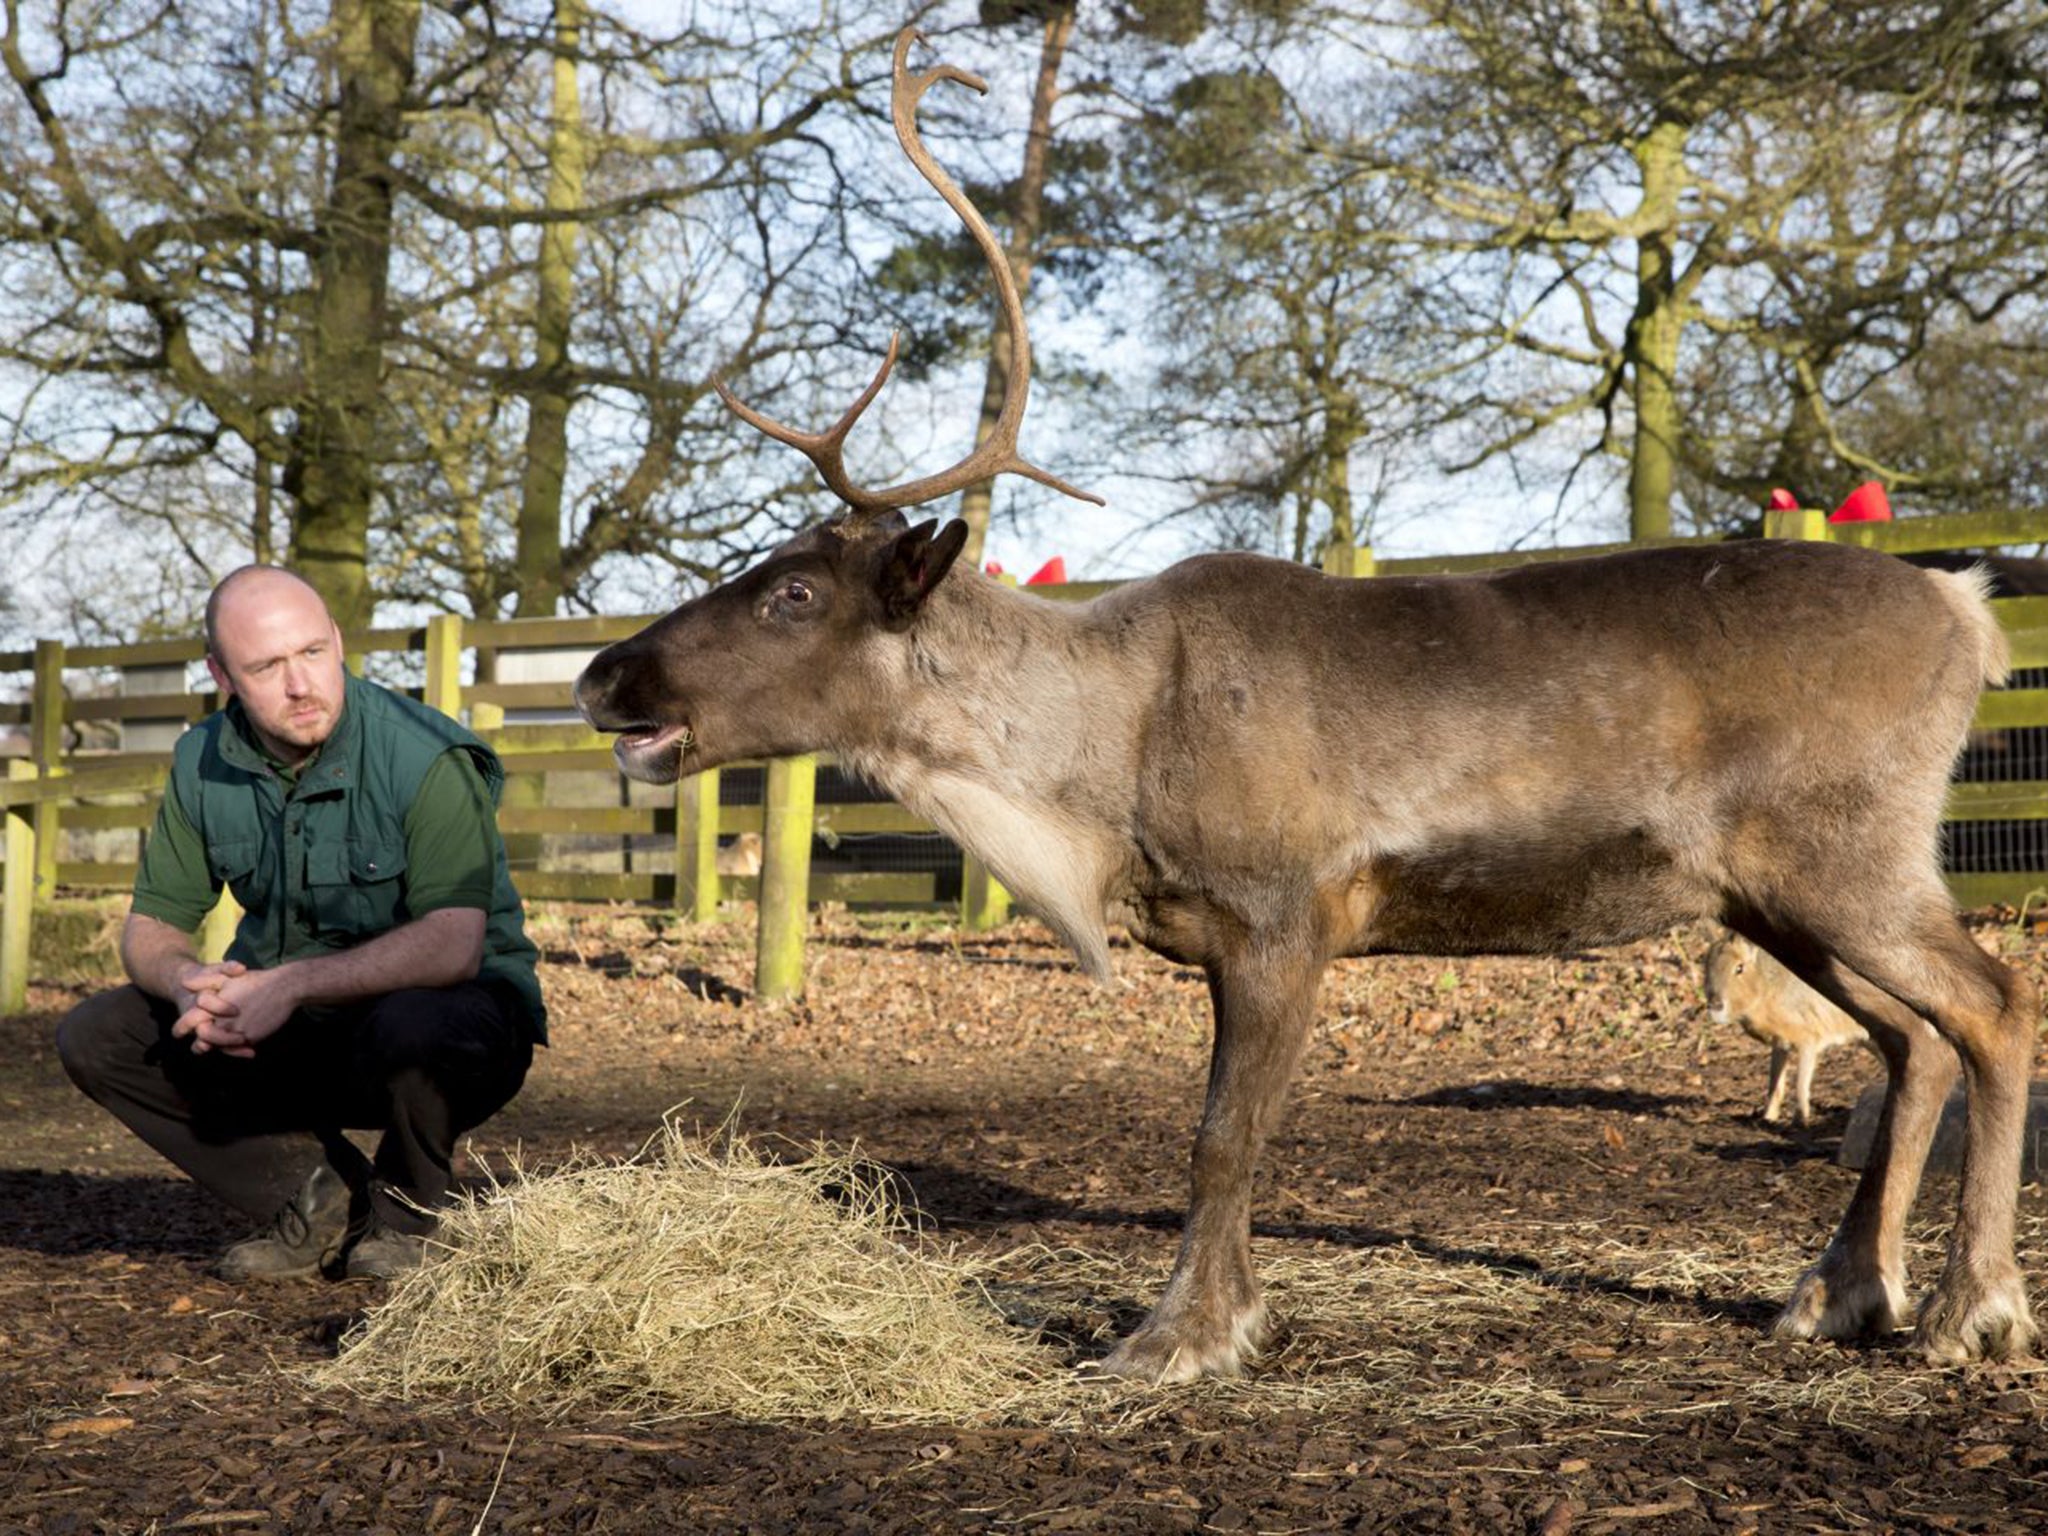 Stephen Perry, 38, zookeeper, ZSL Whipsnade Zoo, Bedfordshire